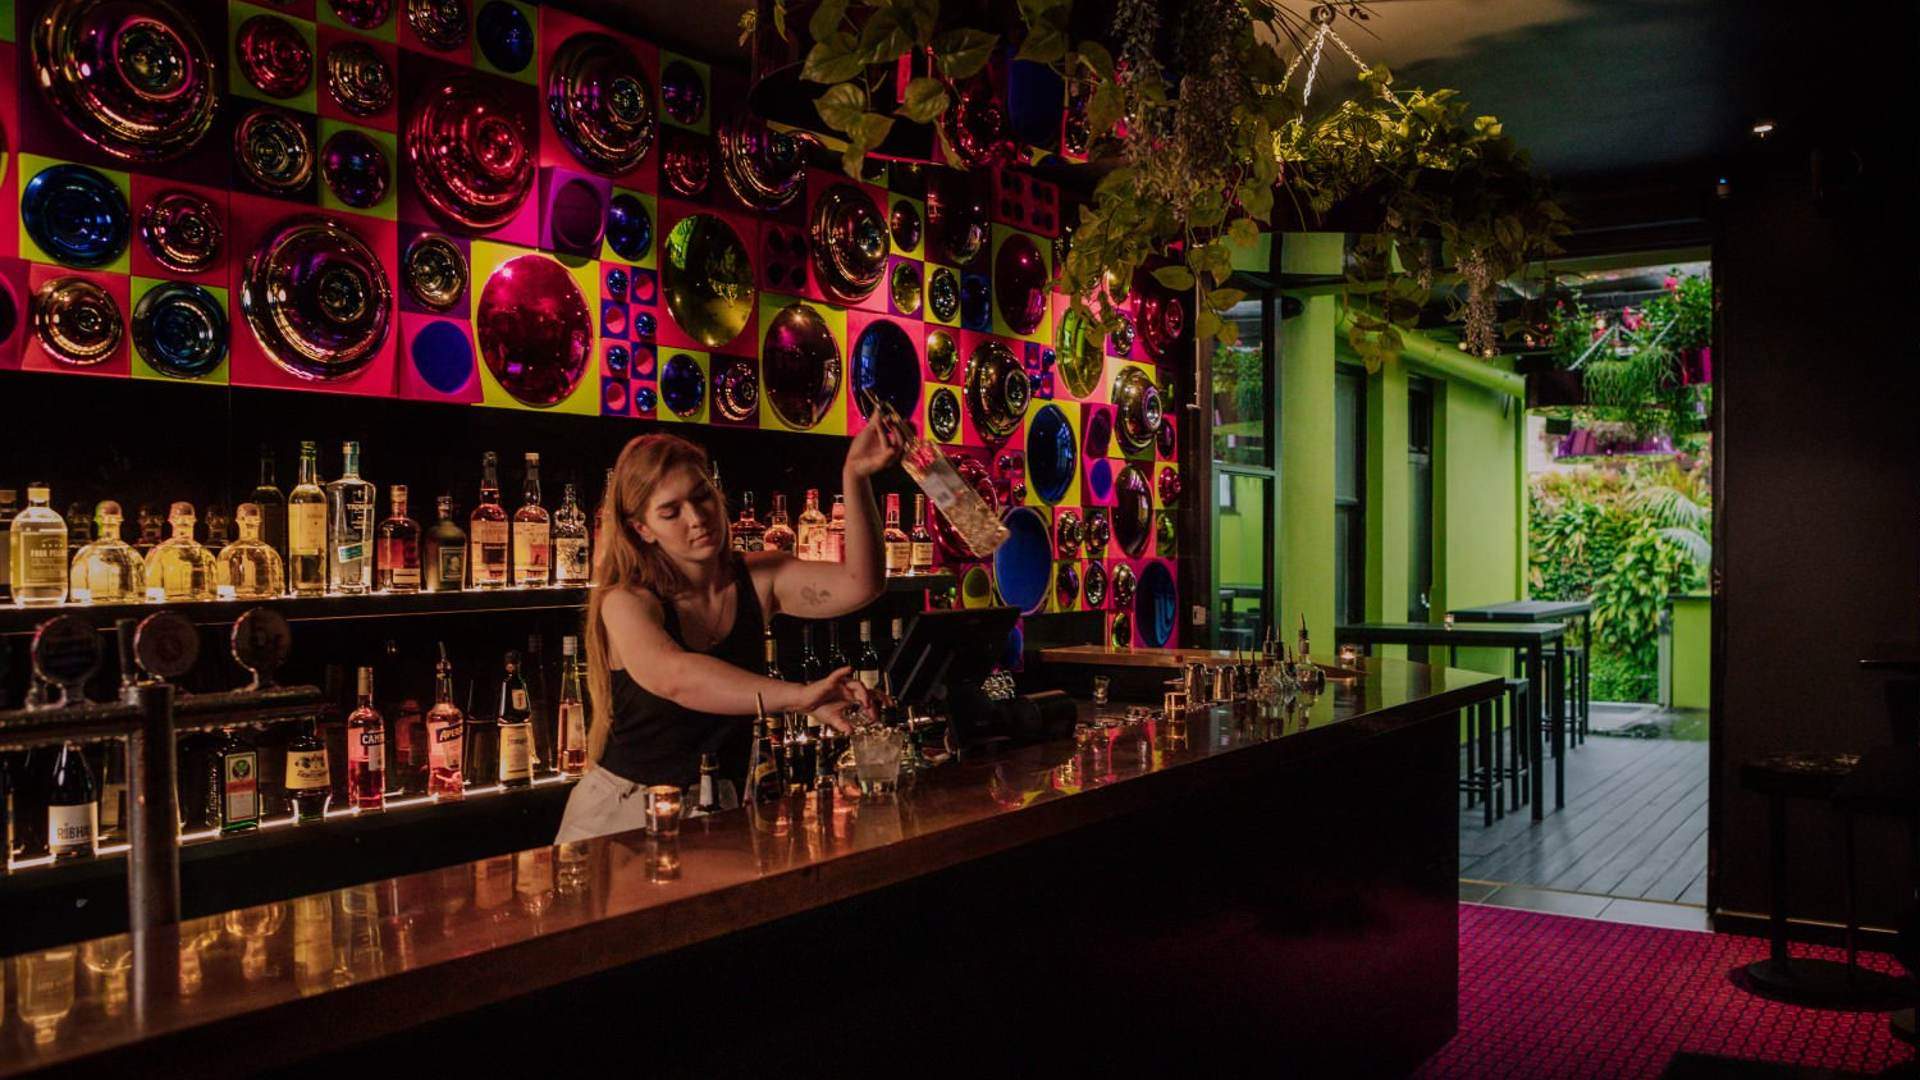 Ready to Party: The Gertrude Hotel Has Scored an Edgy and Bold Glam-Rock Makeover